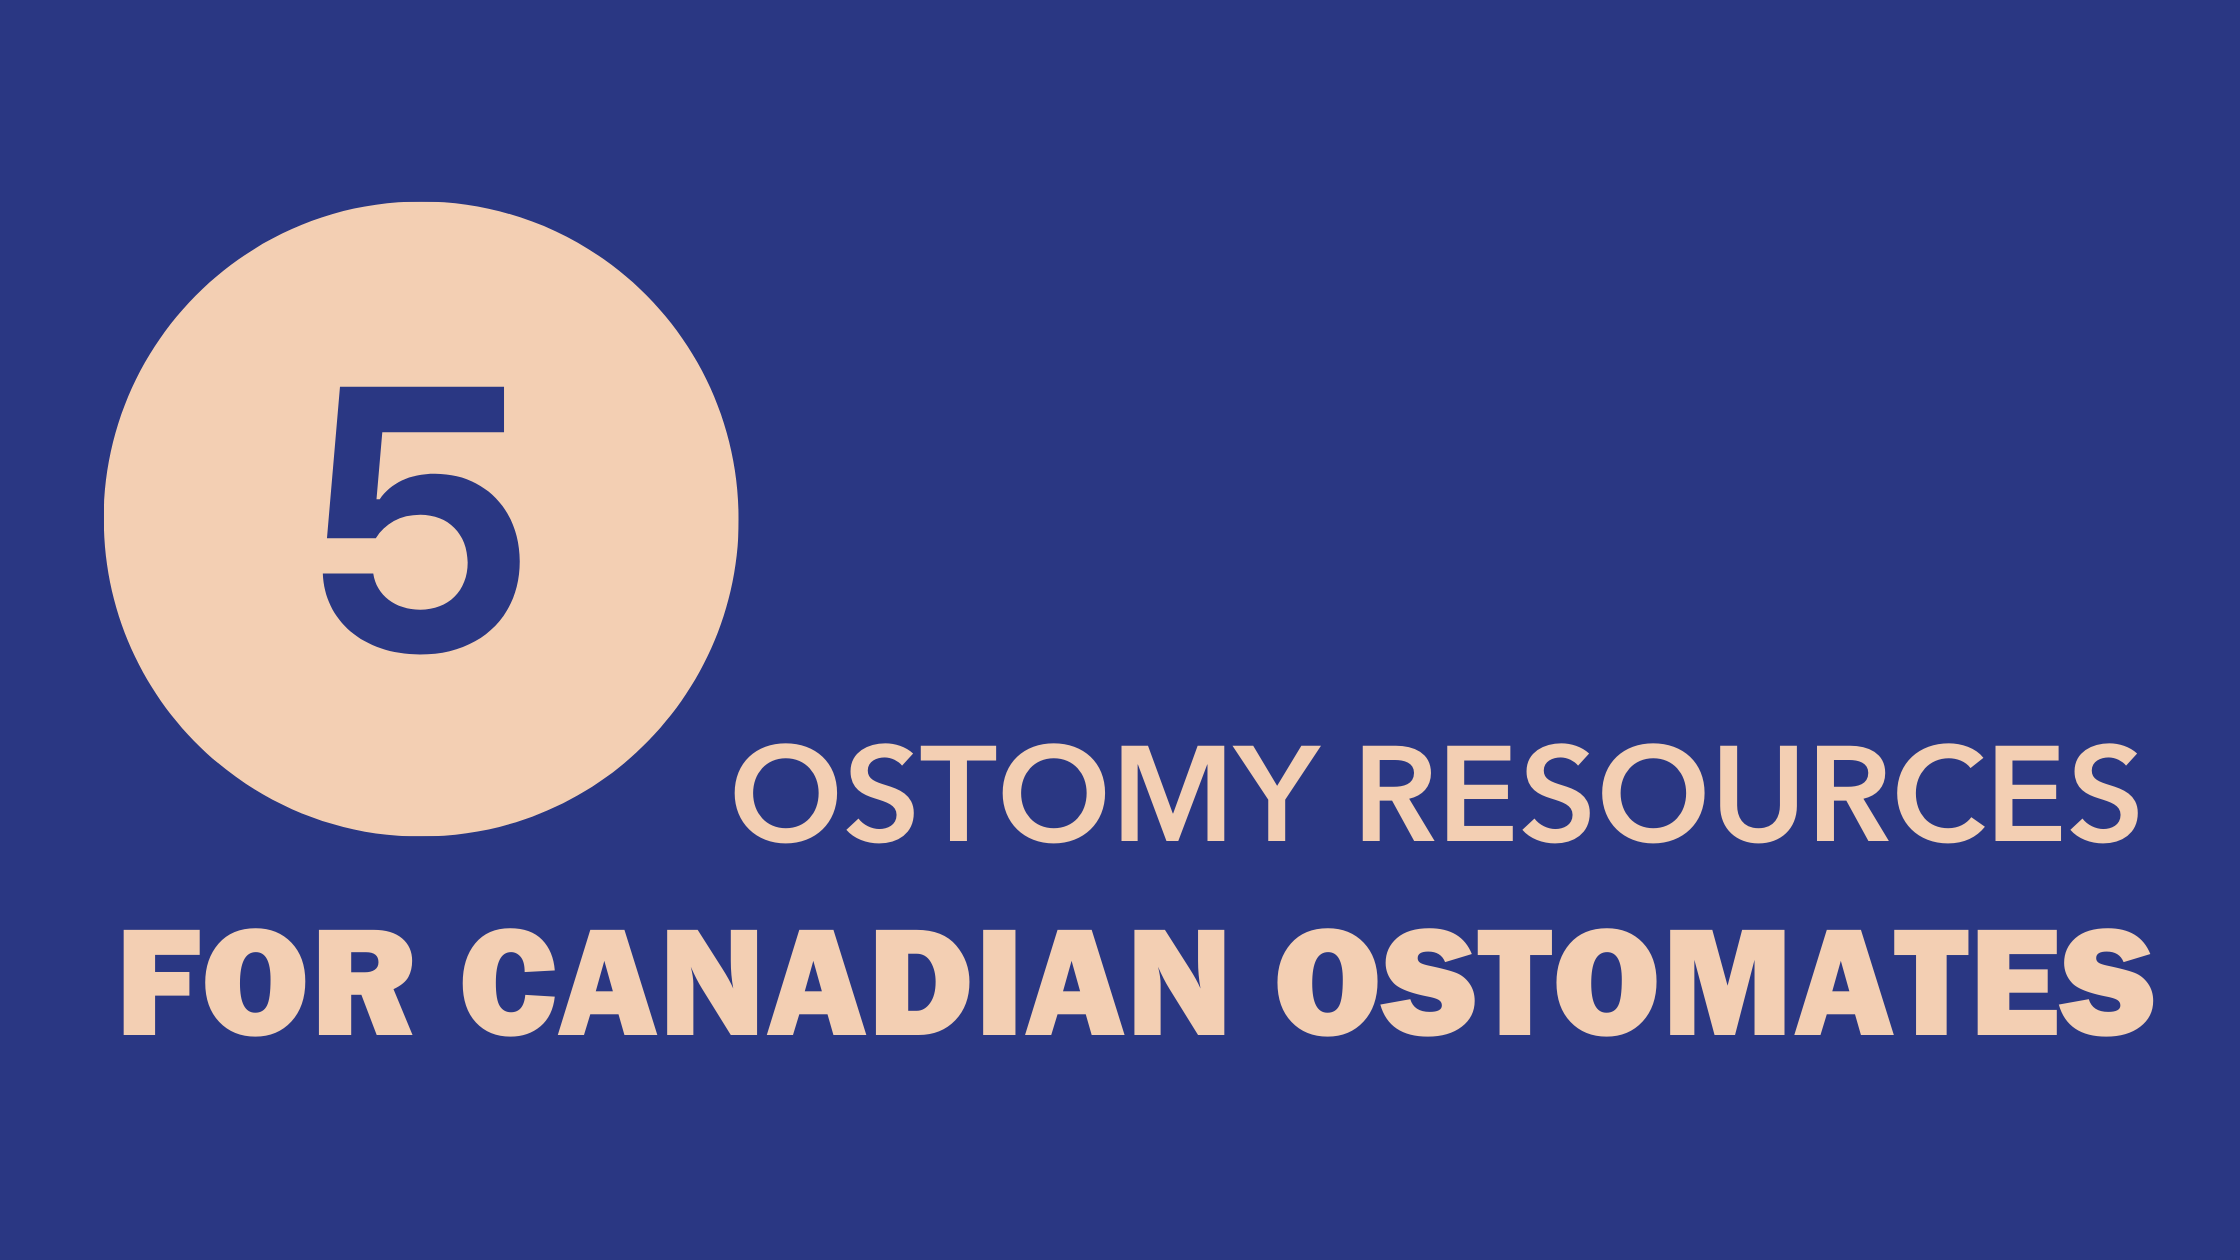 Five Ostomy Resources for Canadian Ostomates